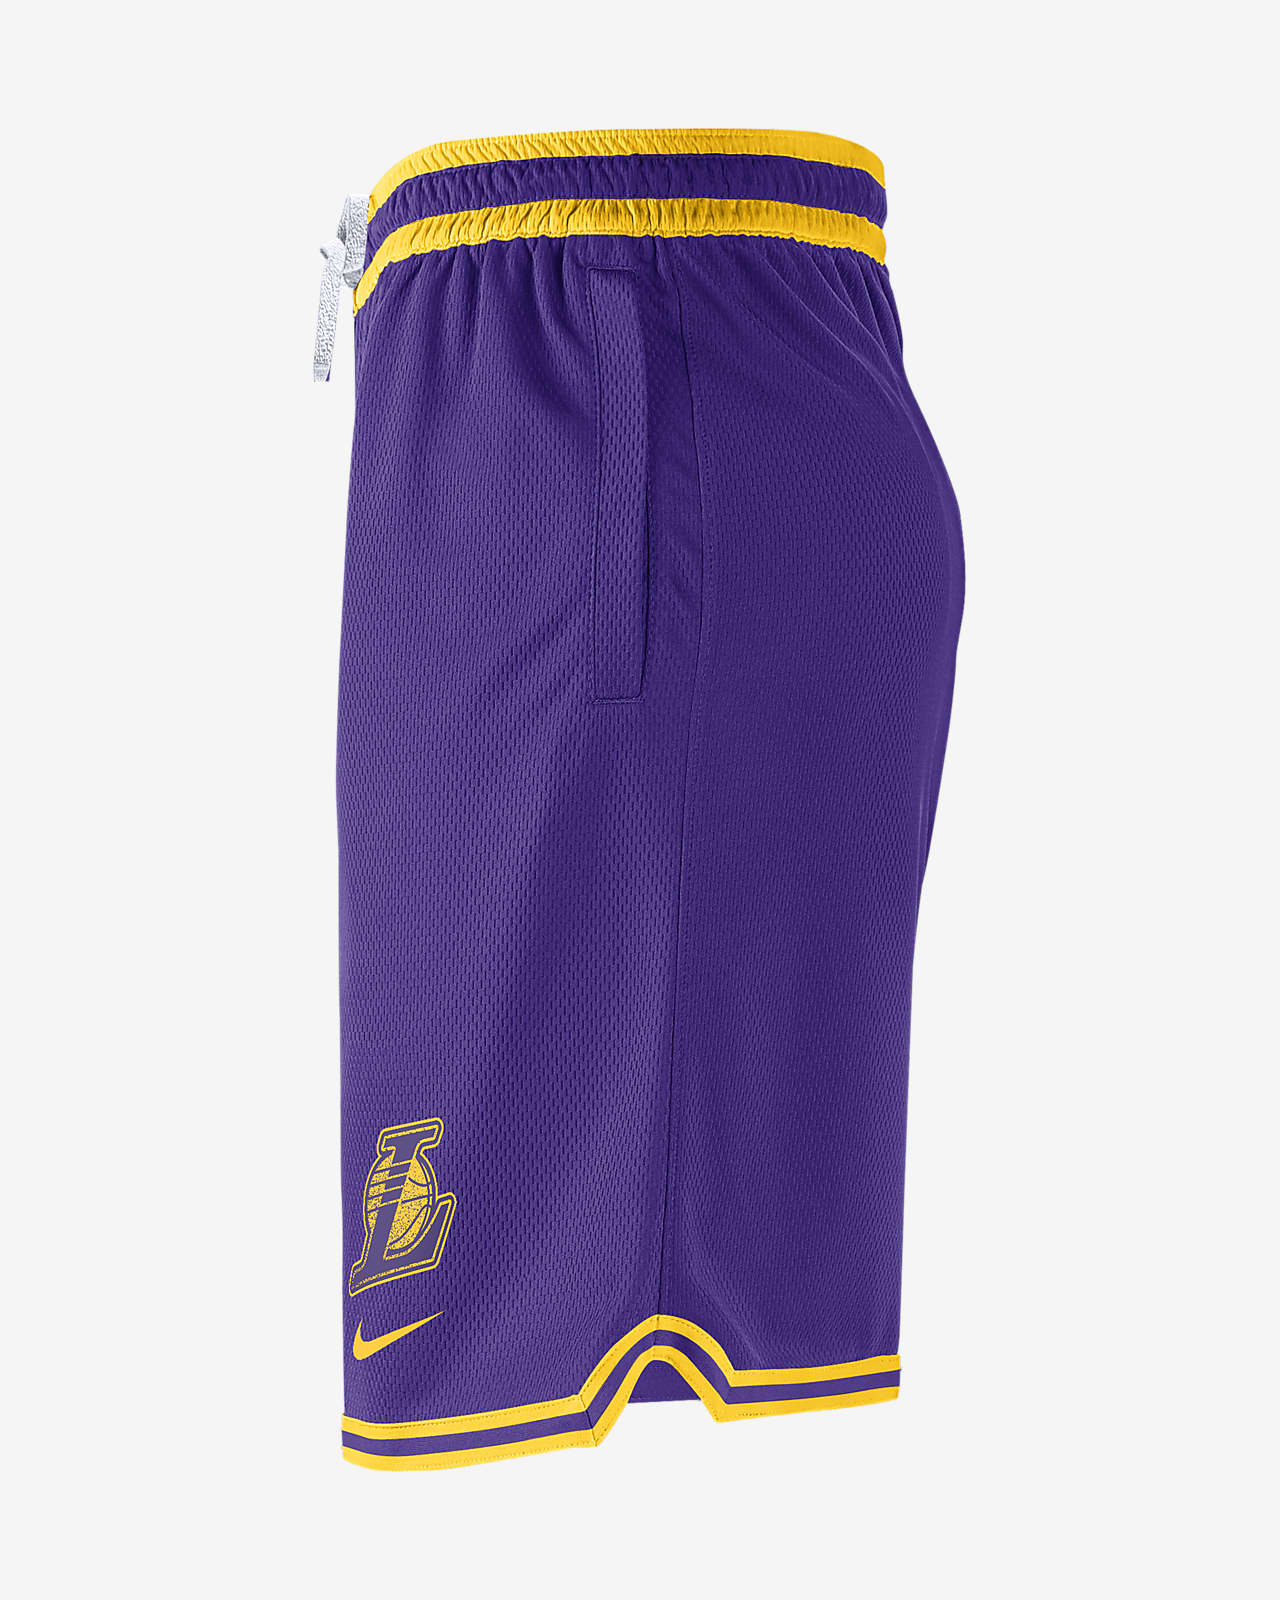 Los Angeles Lakers Basketball Shorts Stitched 